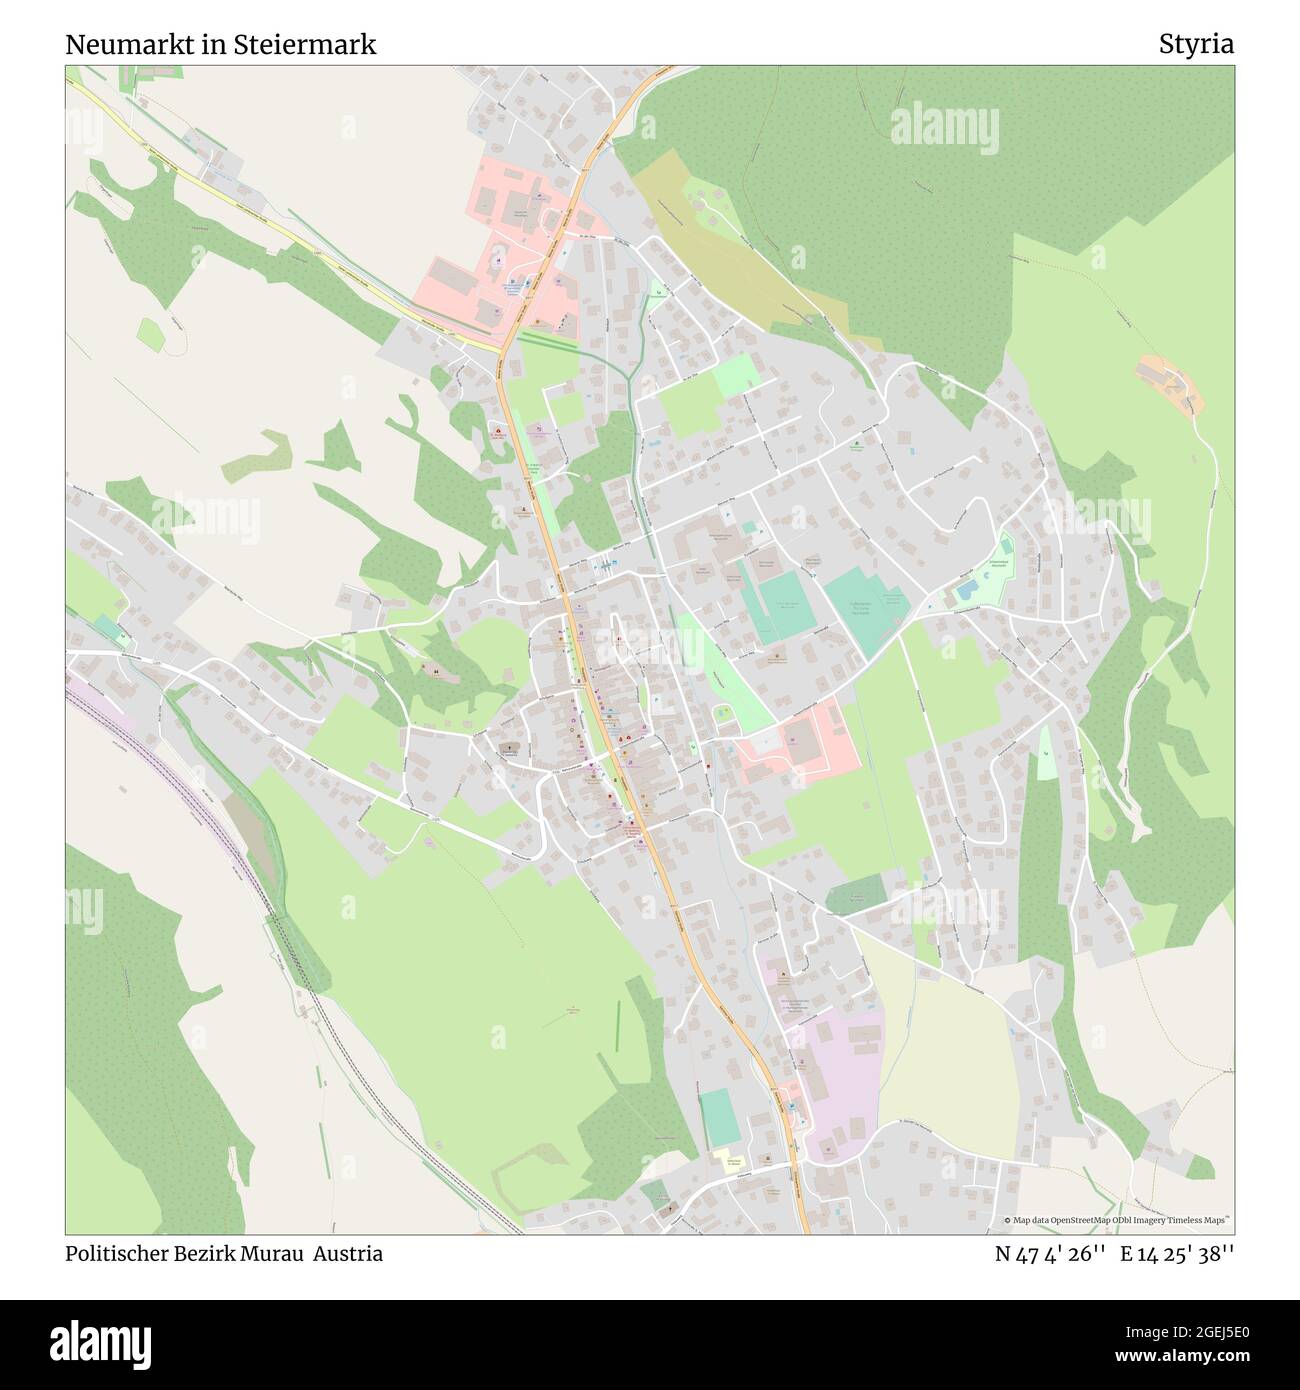 Neumarkt in Steiermark, Politischer Bezirk Murau, Austria, Styria, N 47 4' 26'', E 14 25' 38'', map, Timeless Map published in 2021. Travelers, explorers and adventurers like Florence Nightingale, David Livingstone, Ernest Shackleton, Lewis and Clark and Sherlock Holmes relied on maps to plan travels to the world's most remote corners, Timeless Maps is mapping most locations on the globe, showing the achievement of great dreams Stock Photo